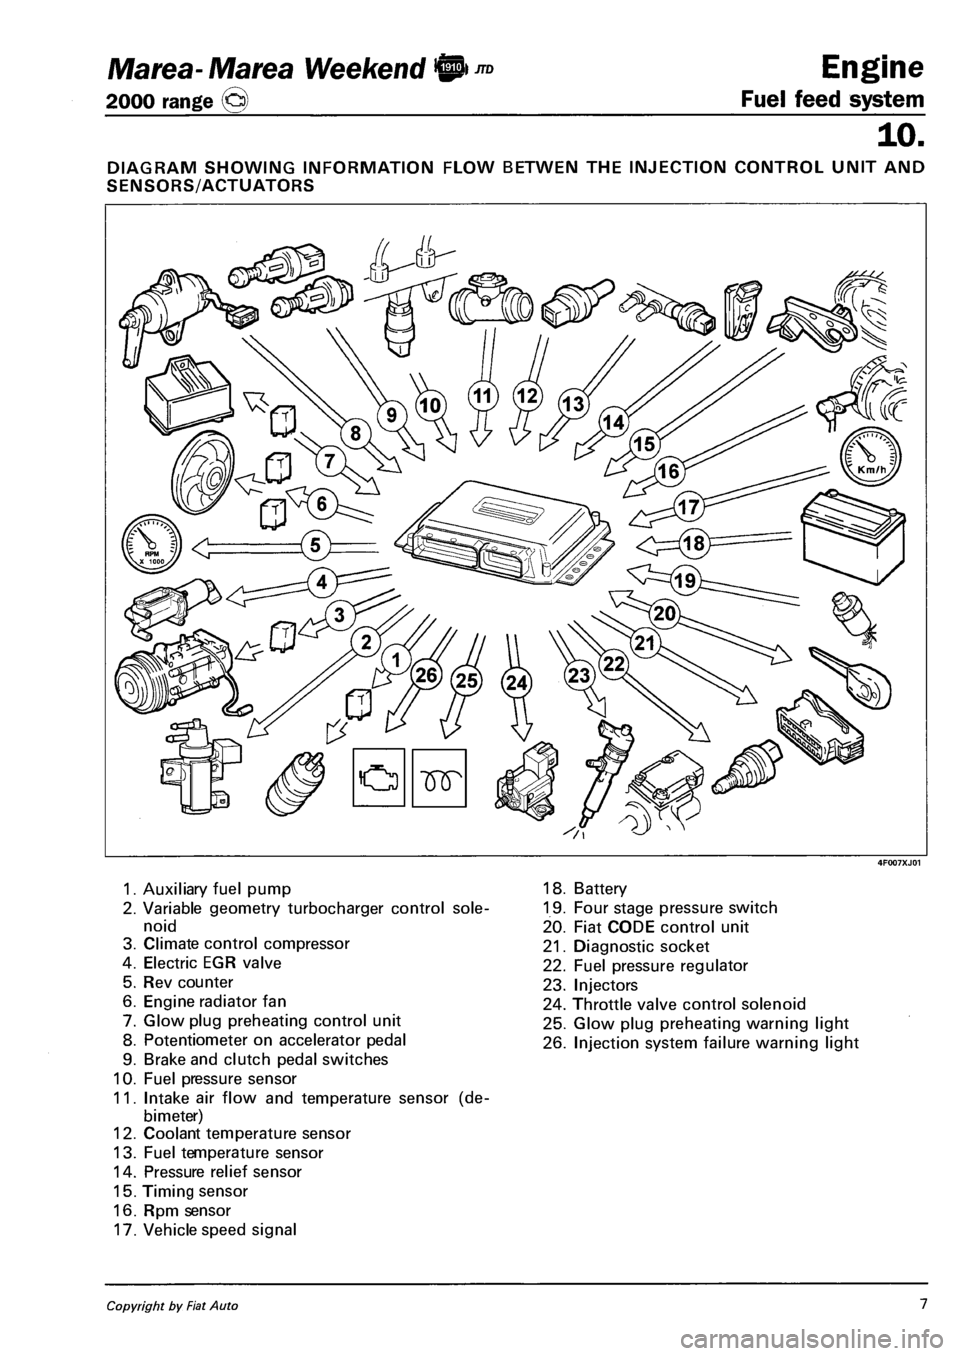 FIAT MAREA 2001 1.G Workshop Manual Marea- Marea Weekend 9 ™ 
2000 range © 
Engine 
Fuel feed system 
10. 
DIAGRAM SHOWING INFORMATION FLOW BETWEN THE INJECTION CONTROL UNIT AND 
SENSORS/ACTUATORS 
1. Auxiliary fuel pump 
2. Variable